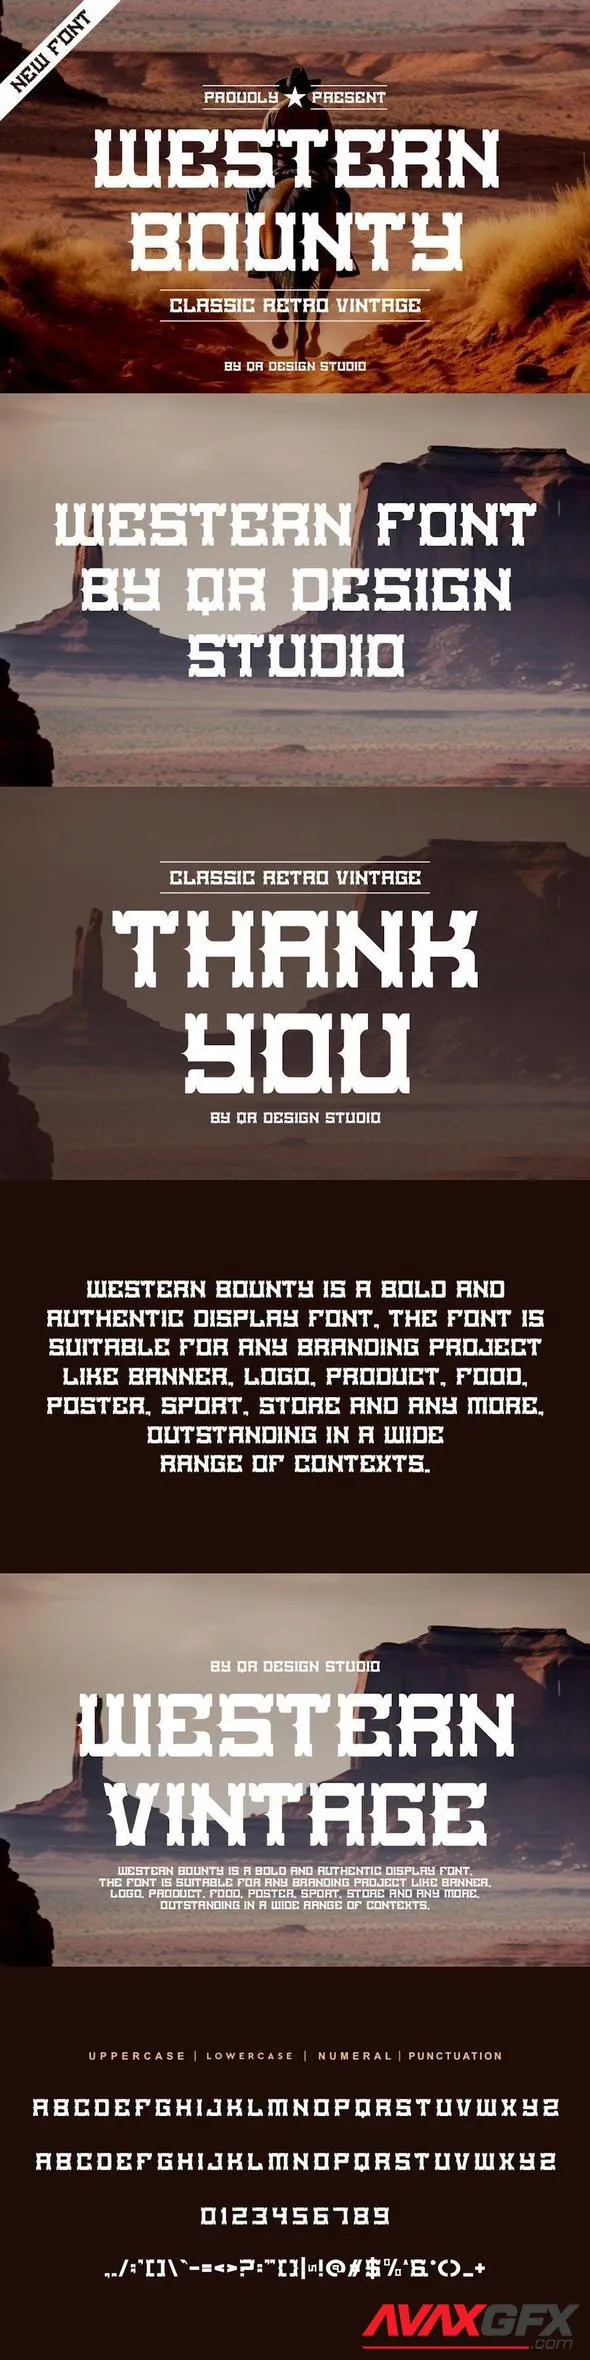 Western Bounty - Classic Typeface Font